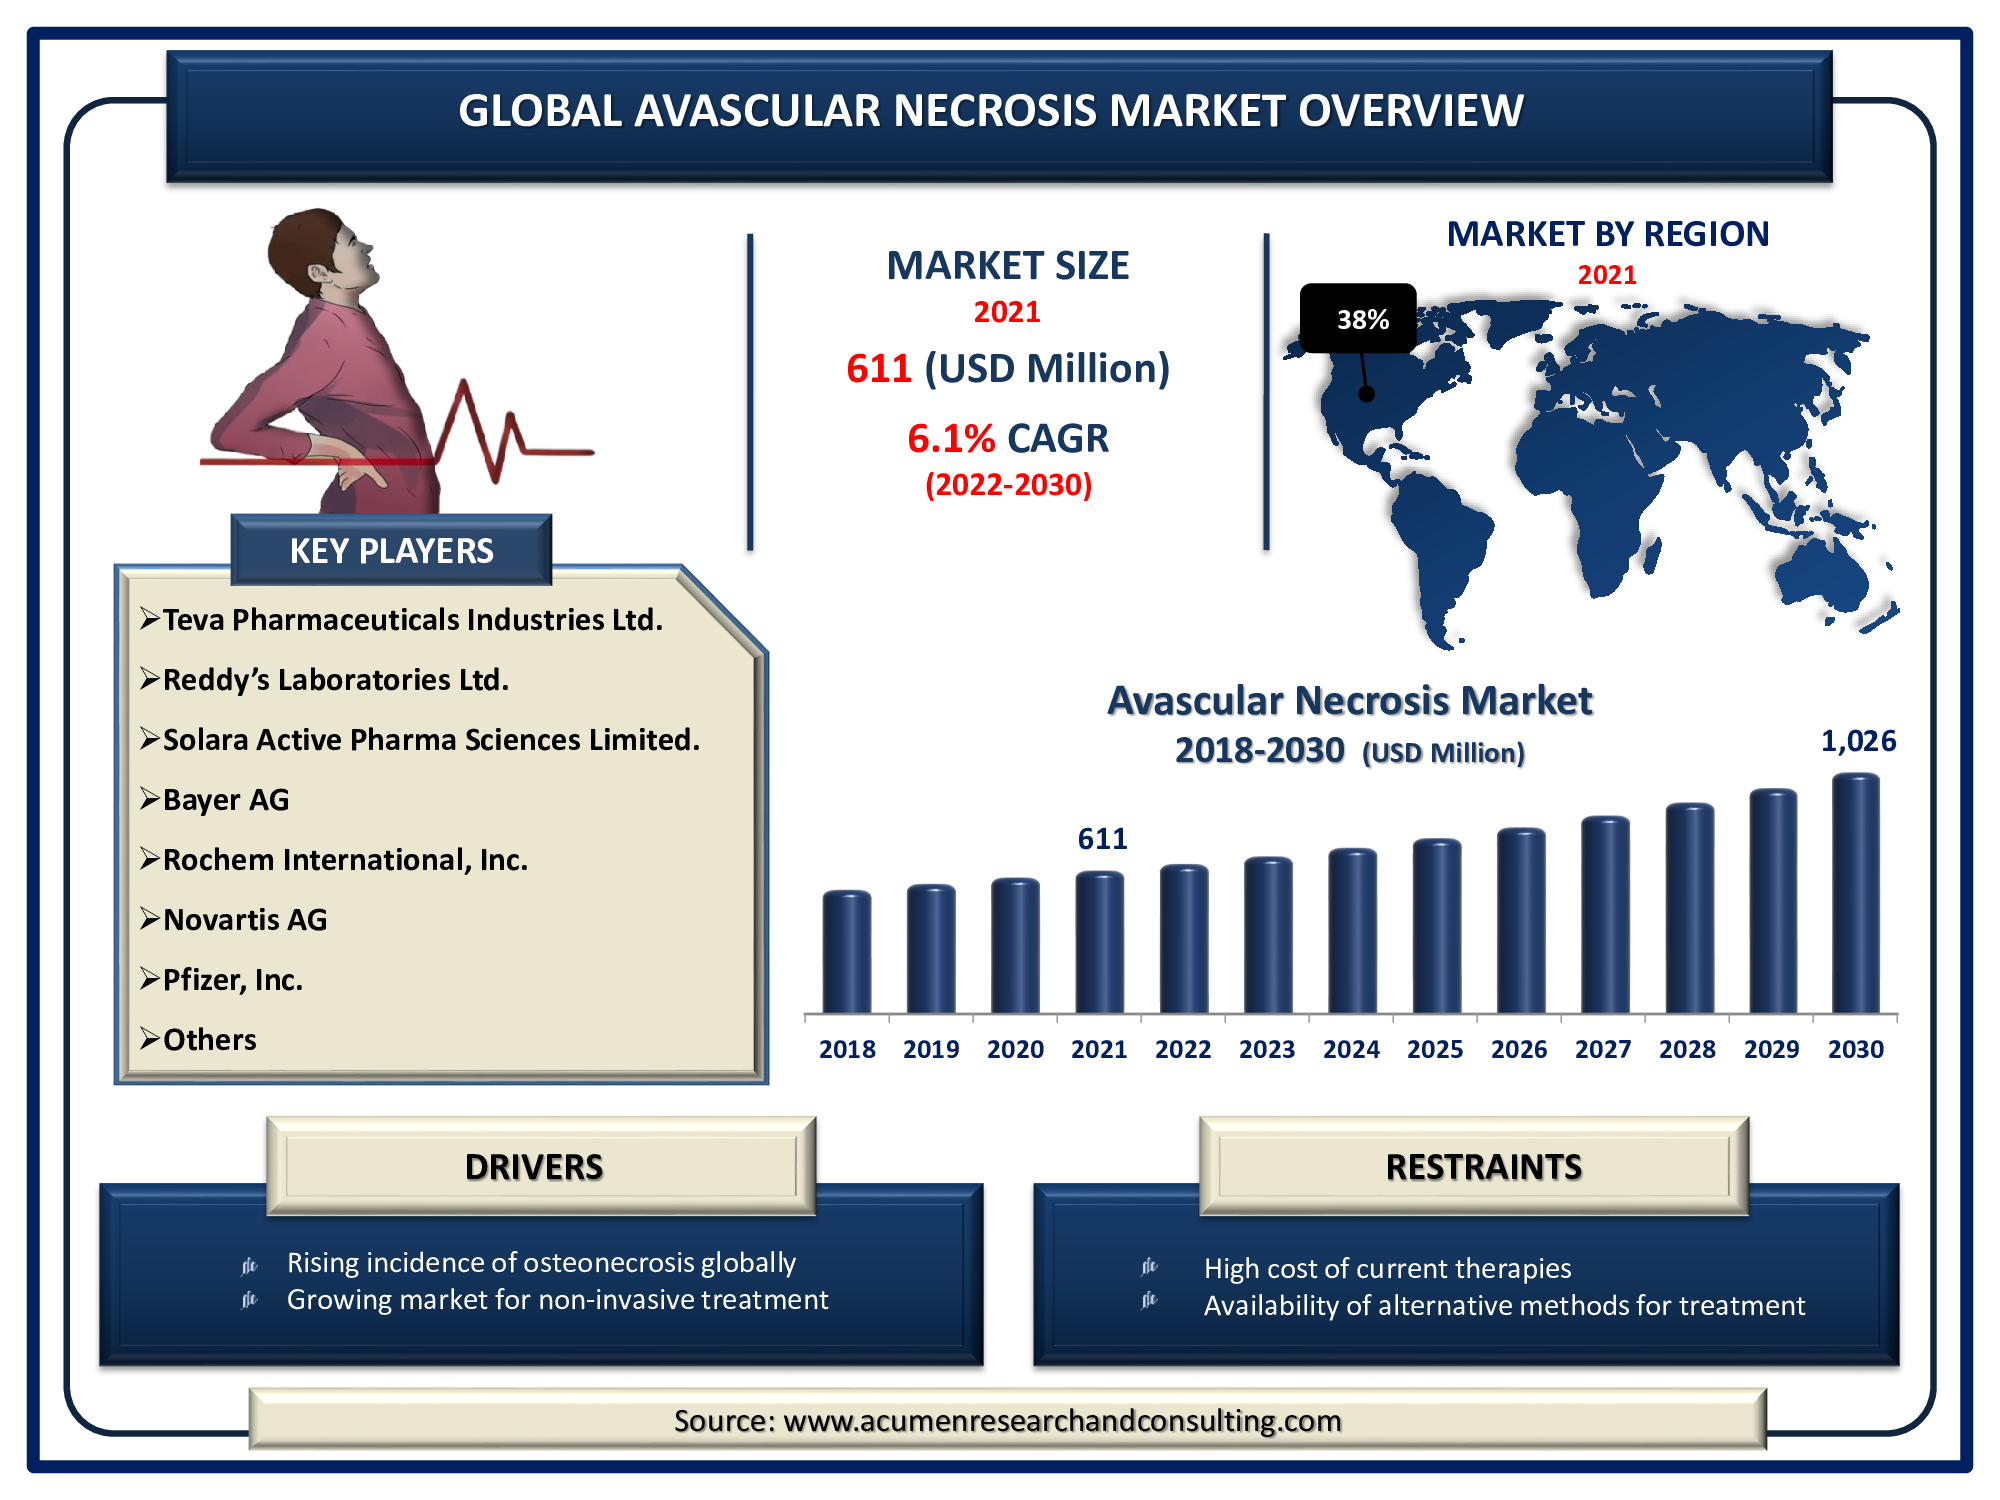 The Global Avascular Necrosis Market Size Accounted for USD 611 Million in 2021 and is predicted to be worth USD 1,026 Million by 2030, with a CAGR of 6.1% during the forthcoming period from 2022 to 2030.